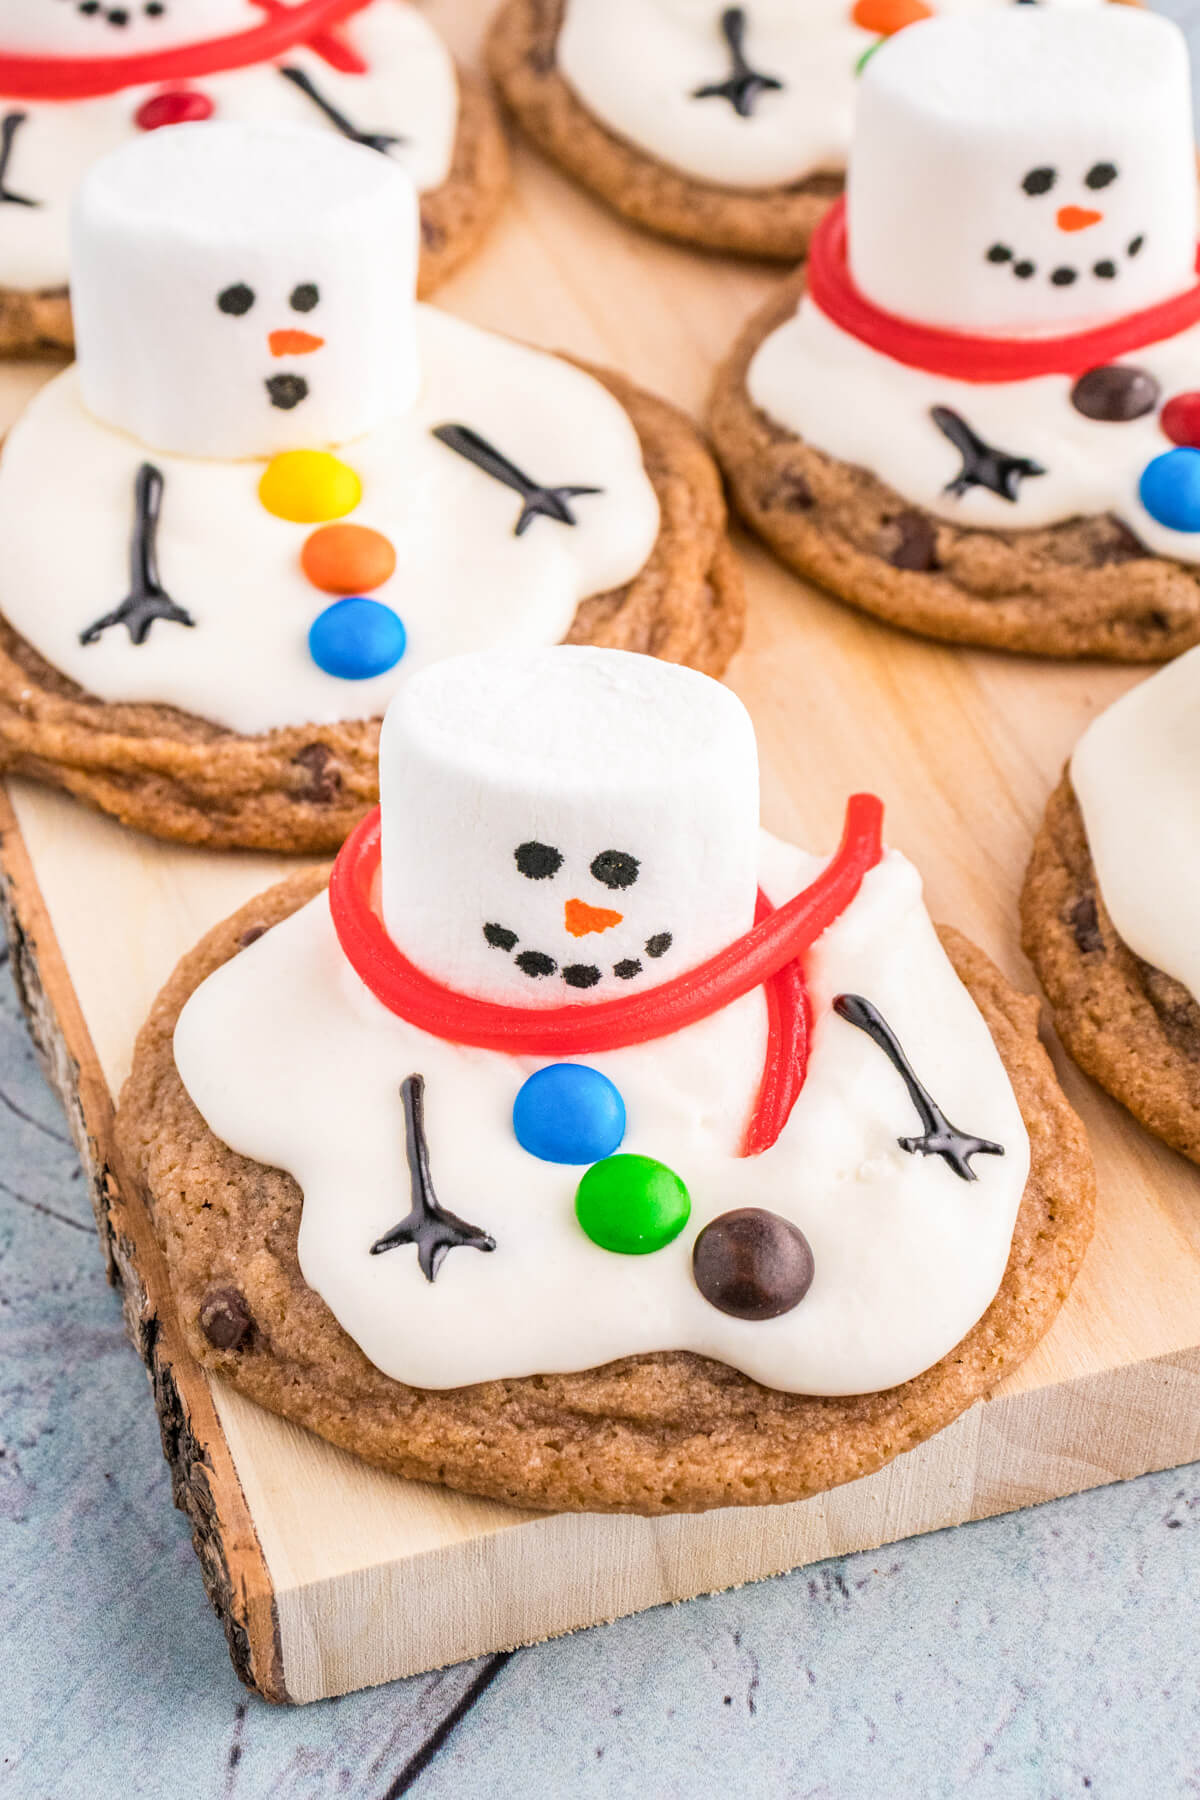 A group of Melted Snowman cookies on a wooden board.